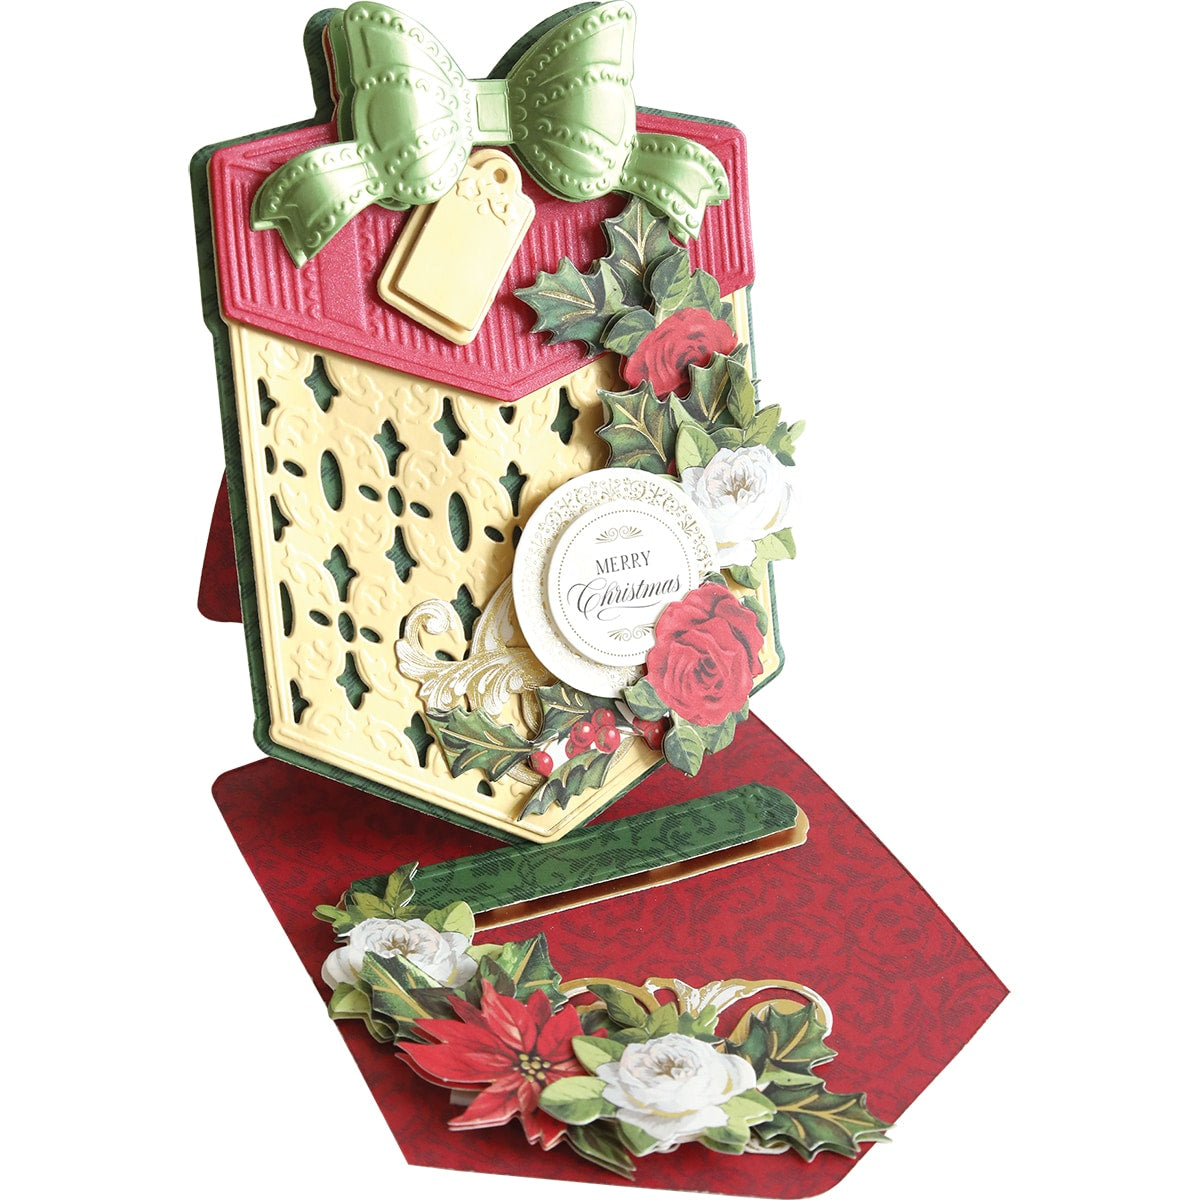 A Perfect Present Easel Die with holly and berries on it.